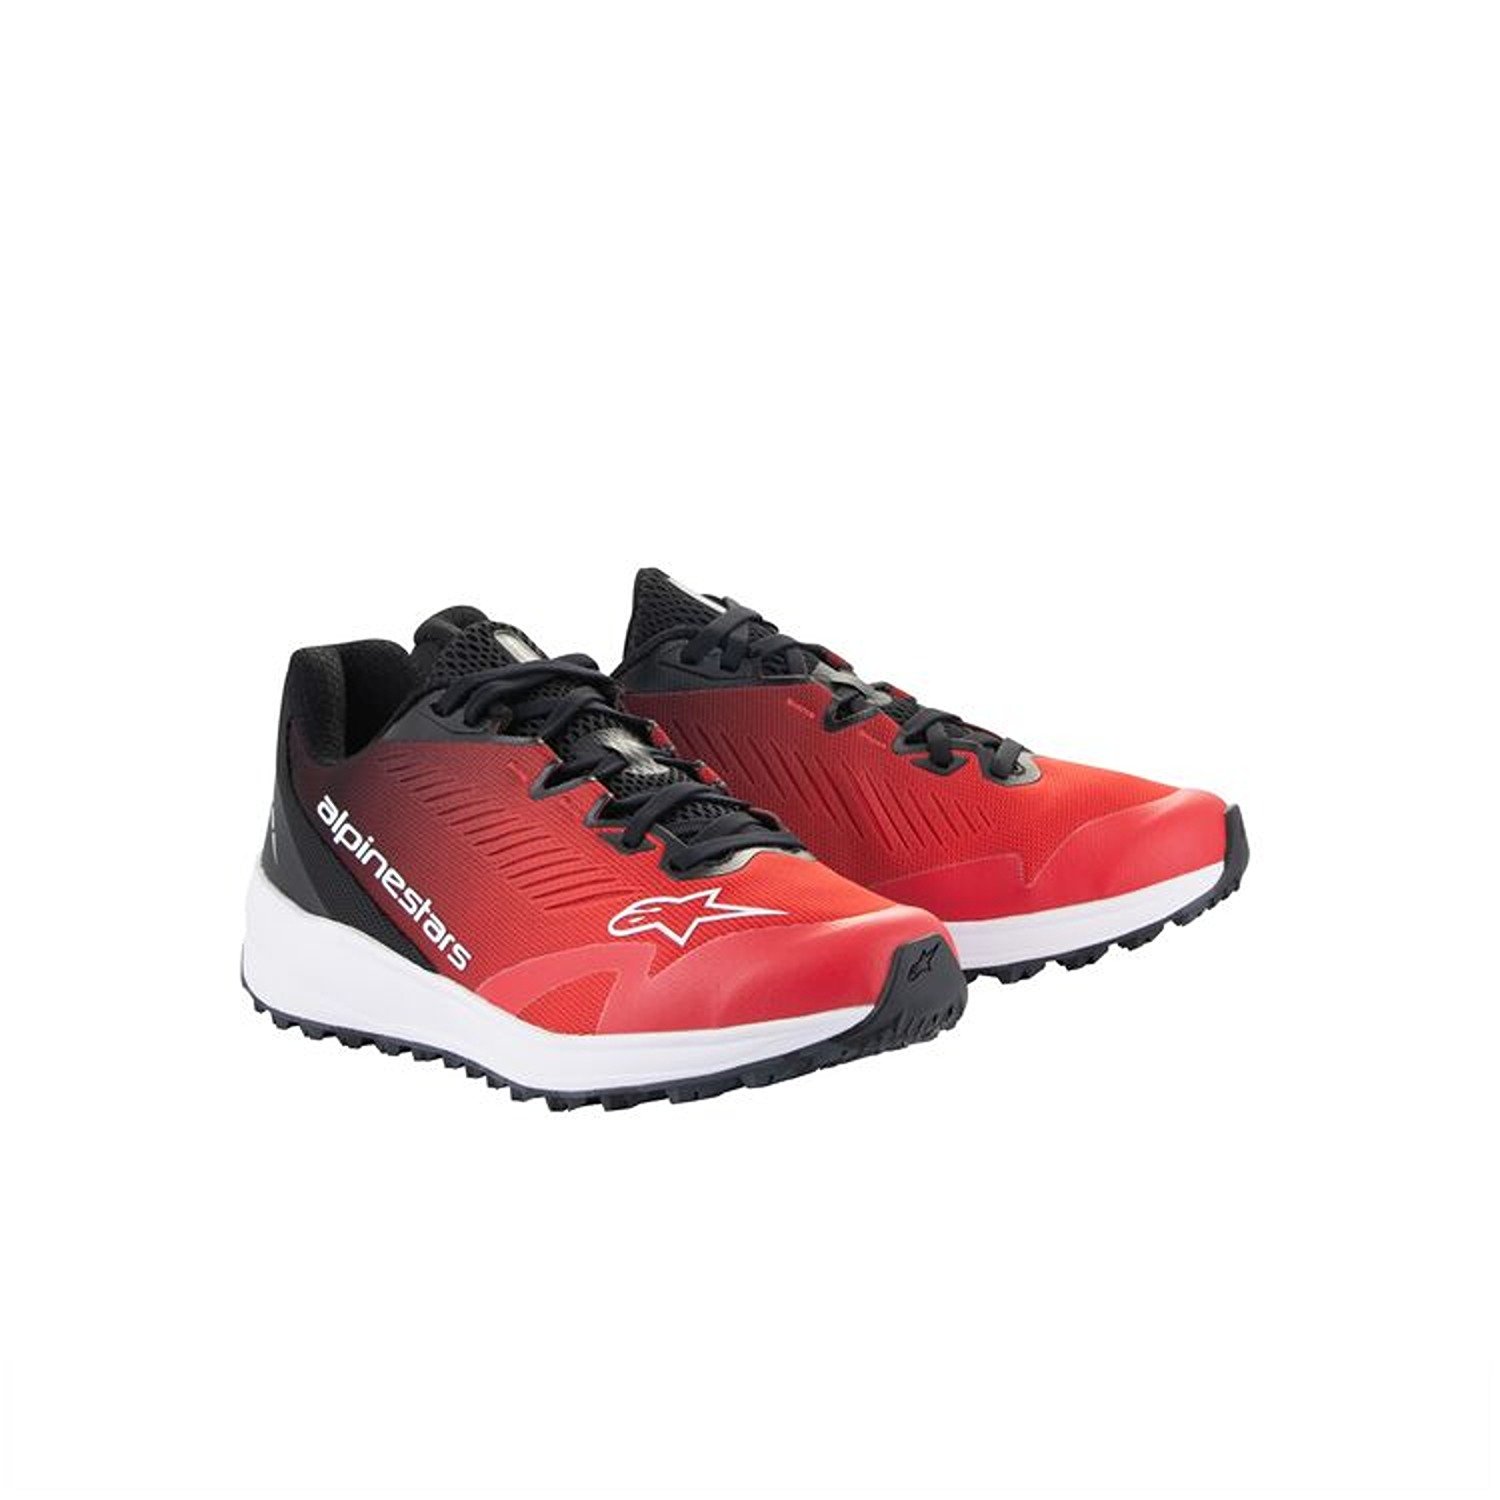 Image of Alpinestars Meta Road V2 Shoes Red Black White Taille US 6